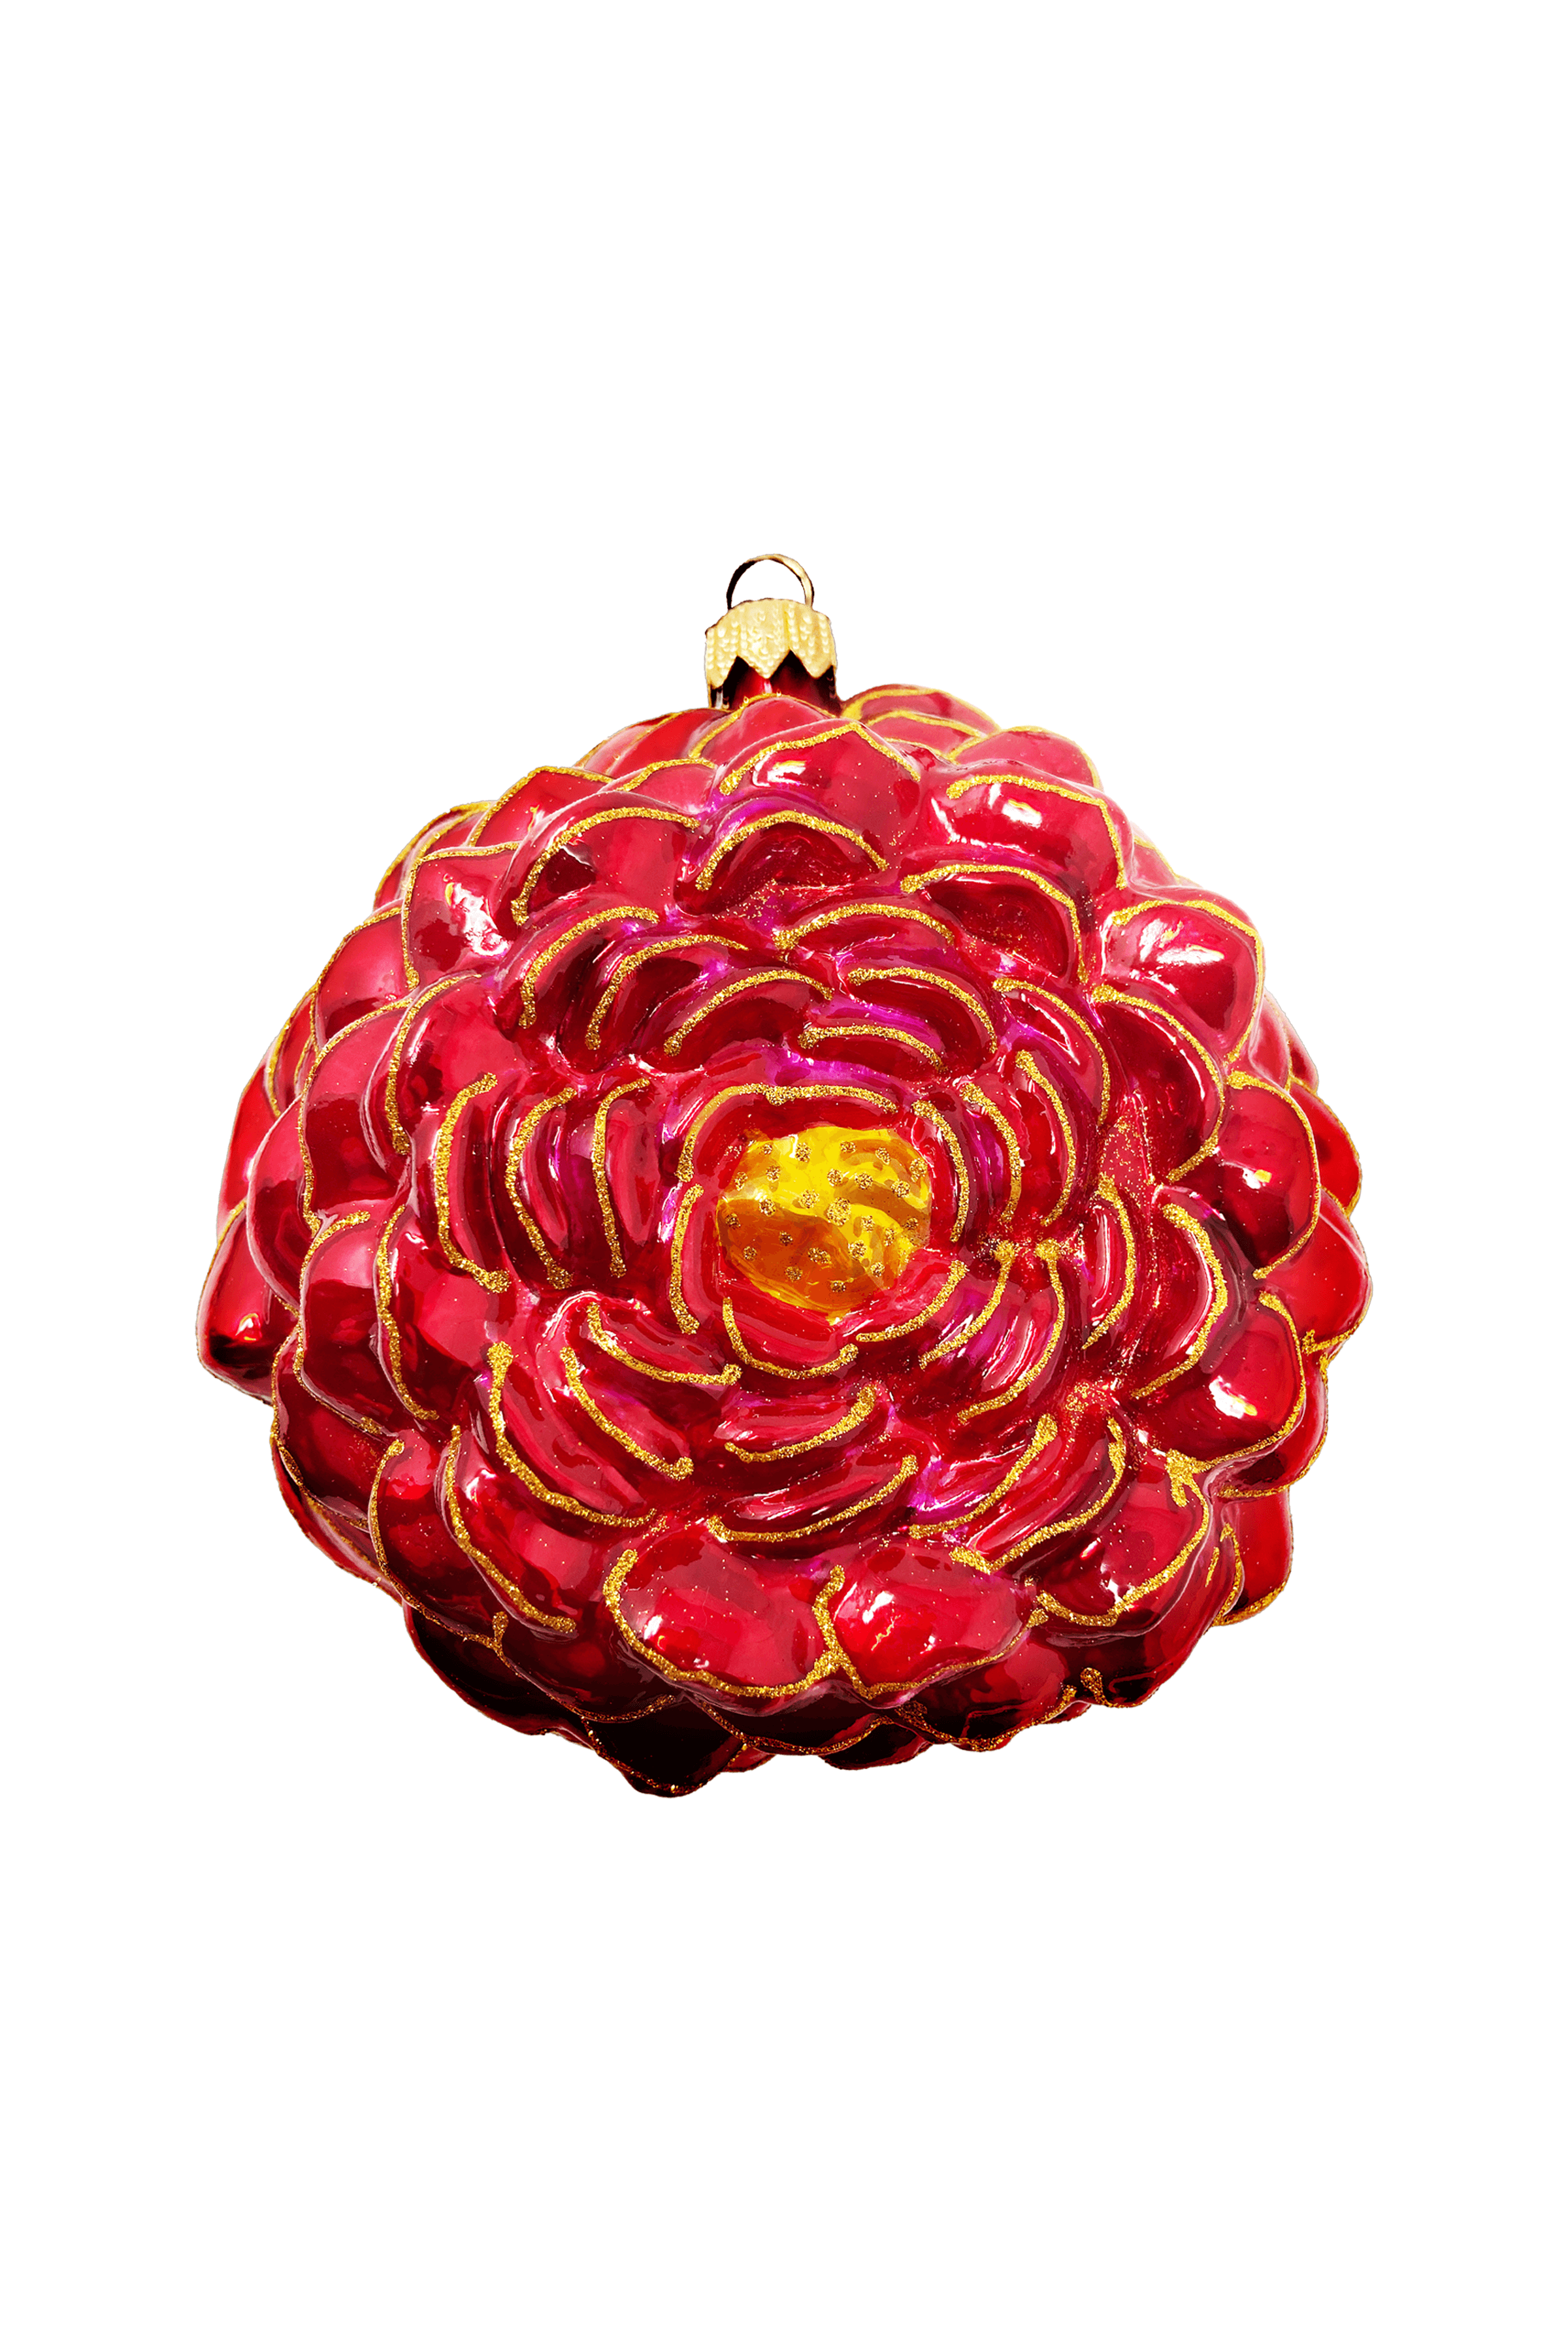 Chinoiserie style glass peony christmas ornament with bright vibrant colors